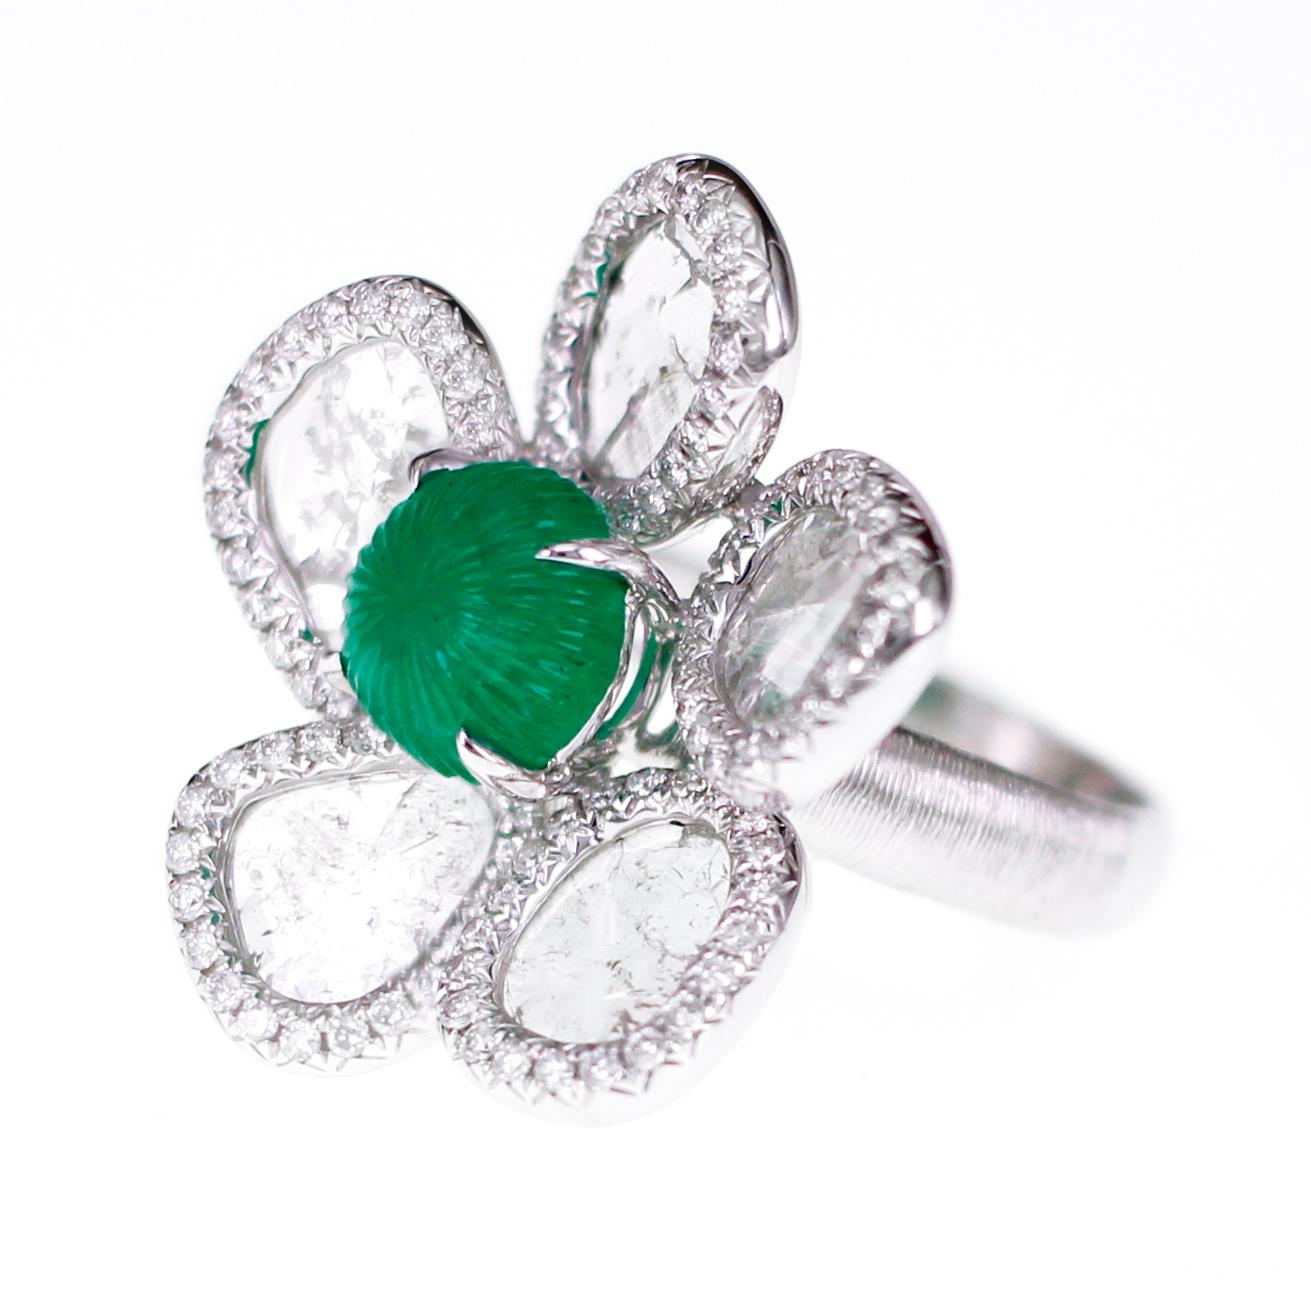 Modernist Antique 2.18 Carat Emerald Carving with Salt and Pepper Slice Diamond Ring For Sale